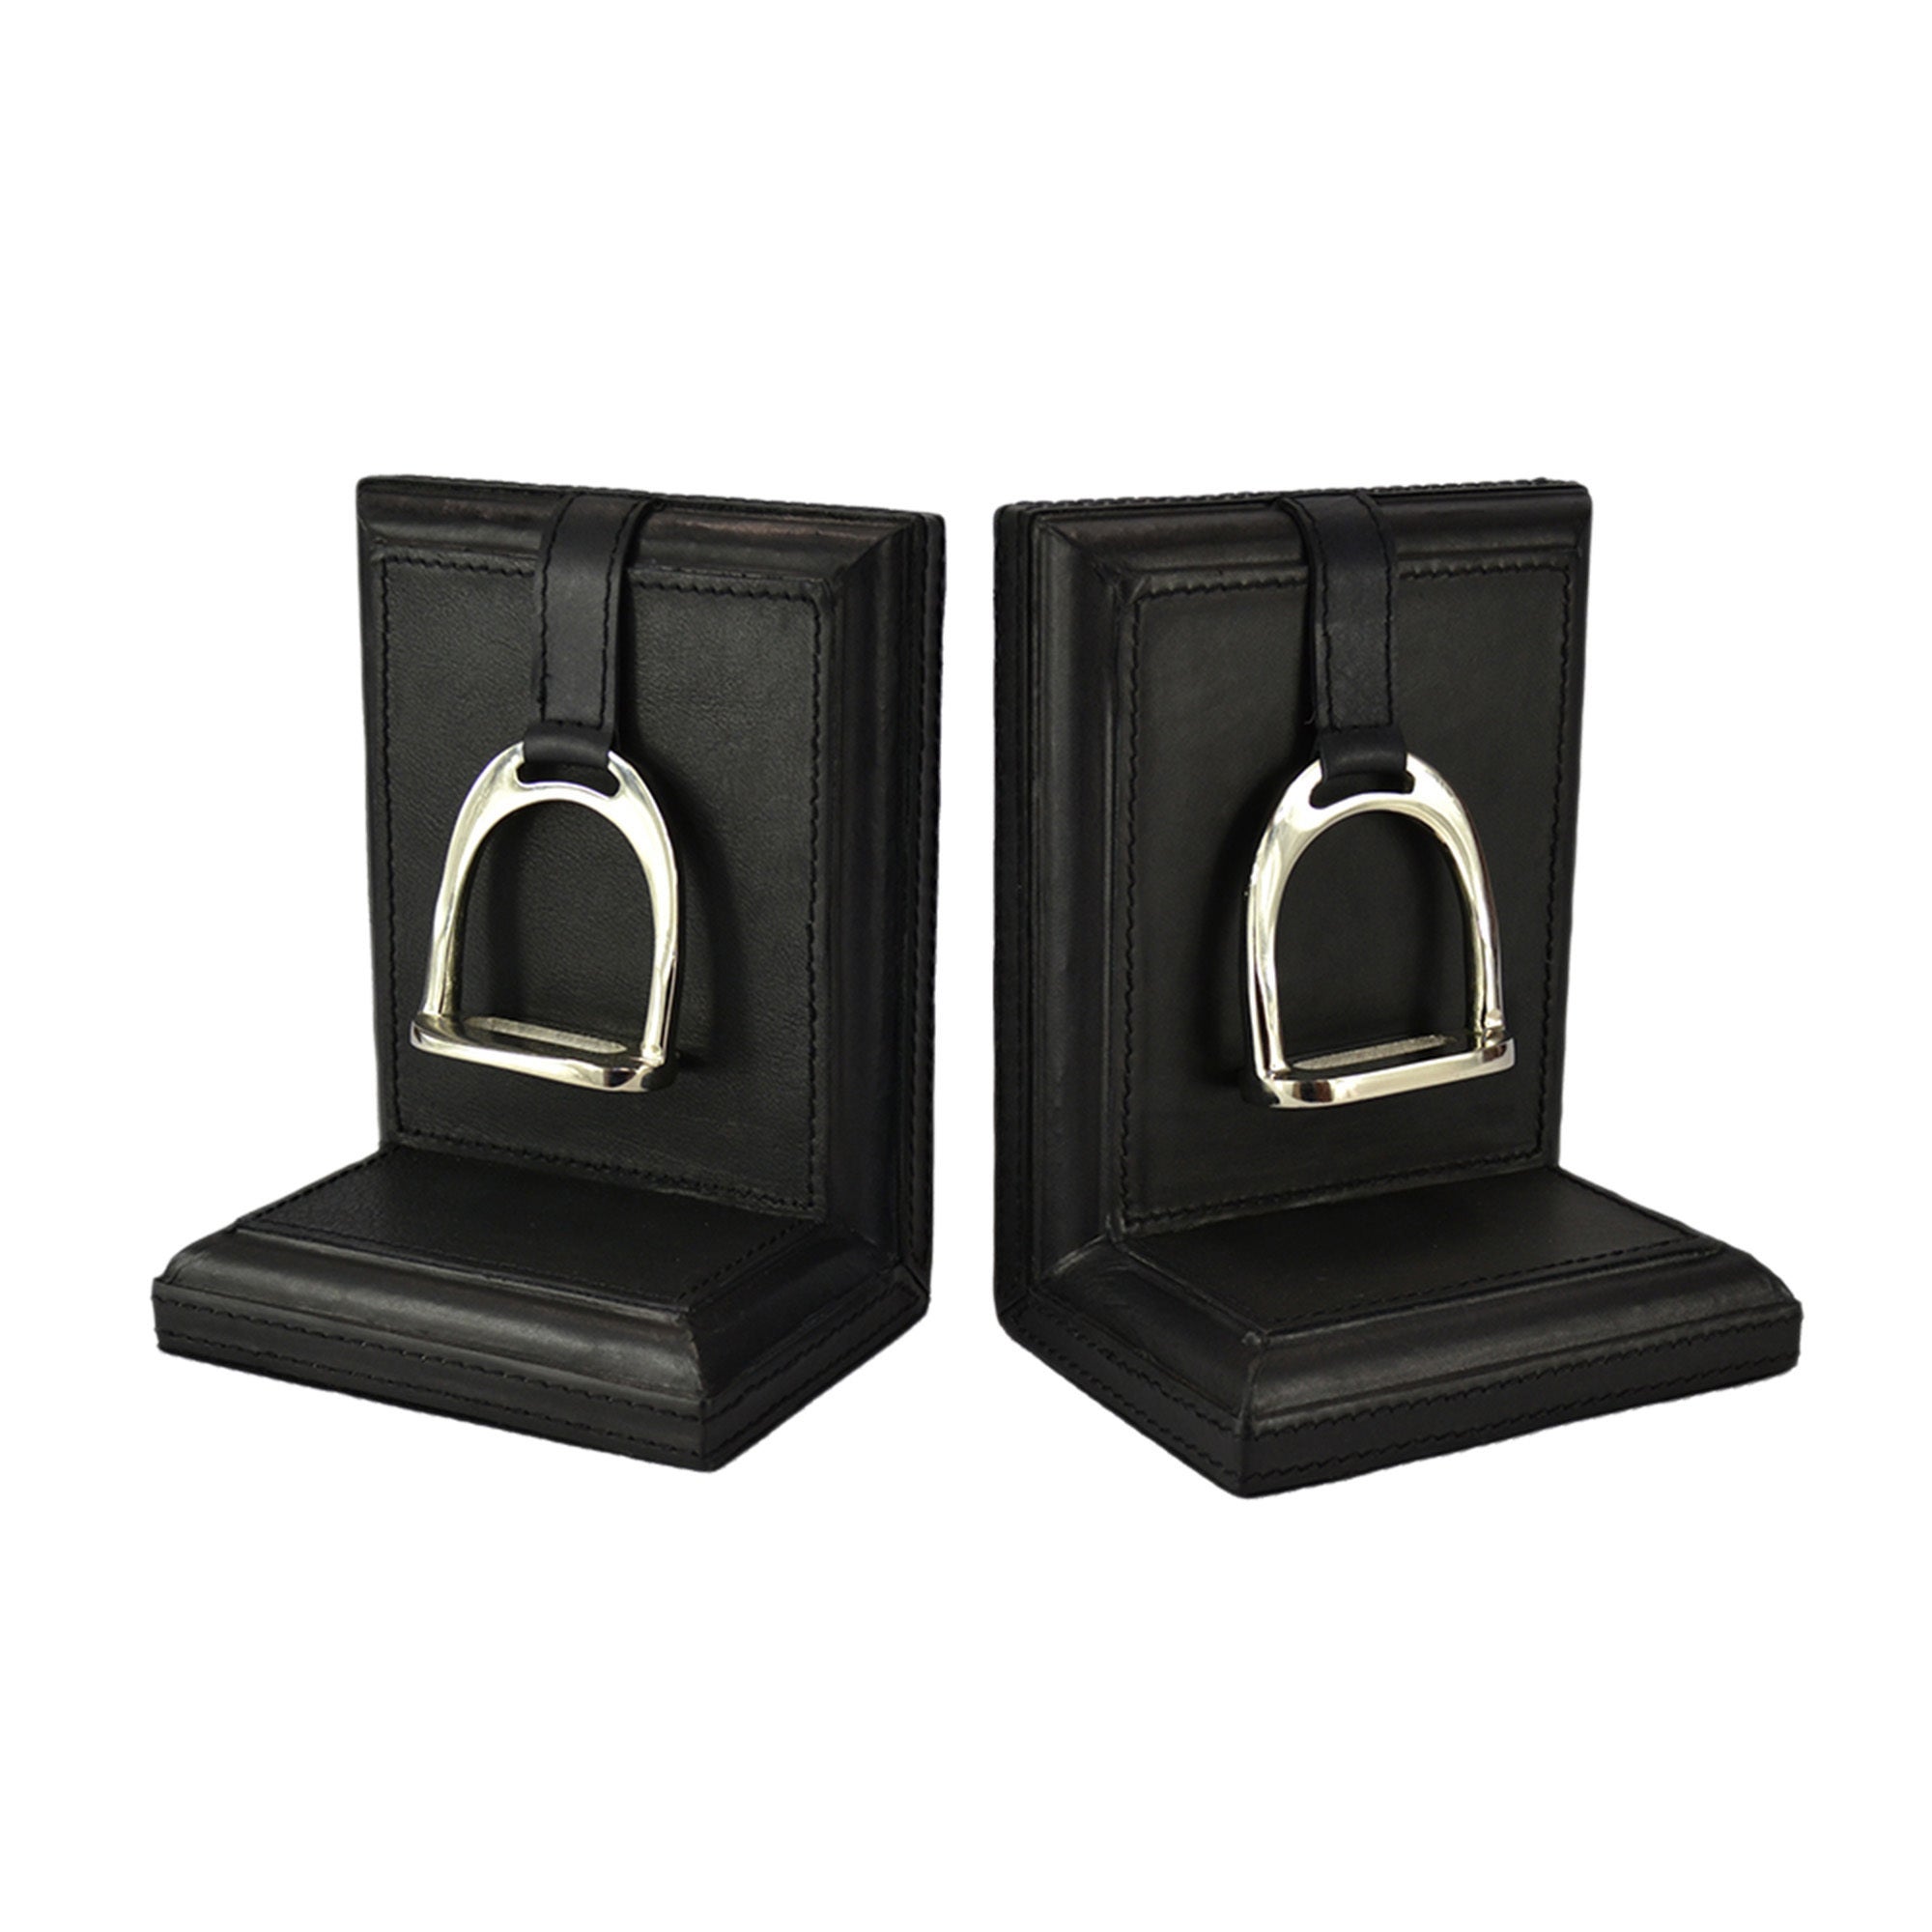 Set of 2 Leather Bookends with Stirrup in Black - Small